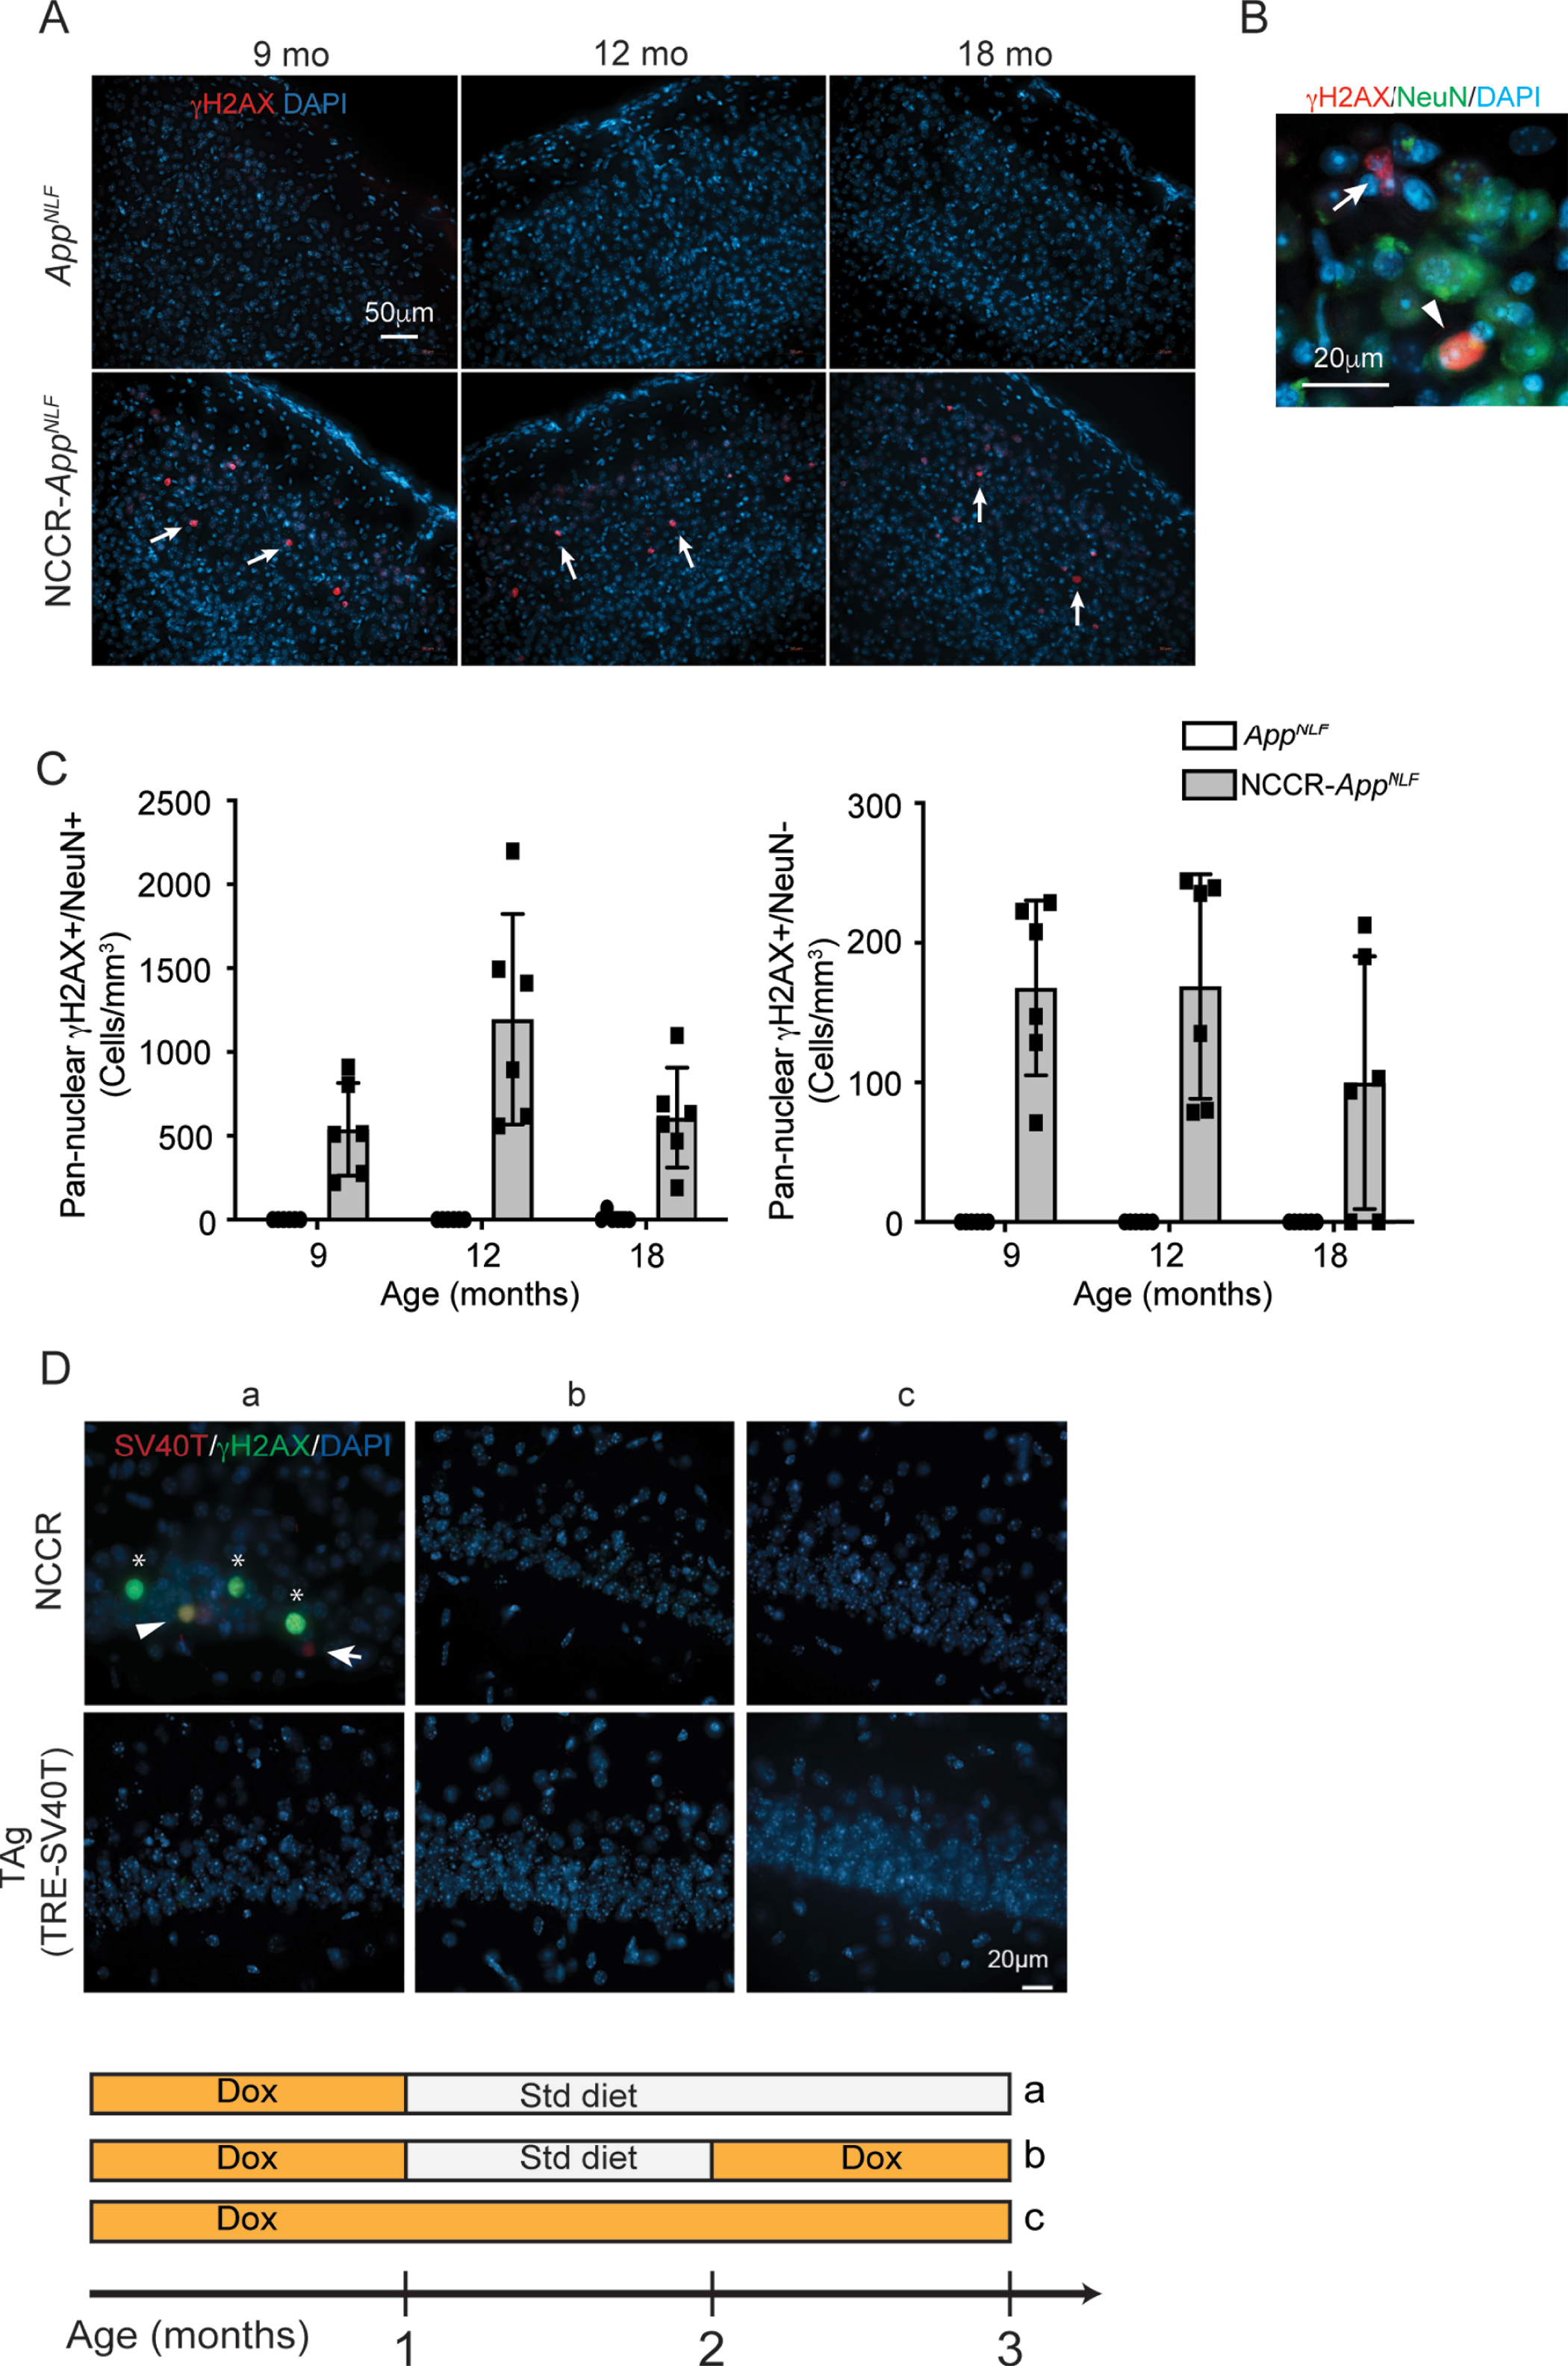 Pan-nuclear γH2AX signal is selectively observed in NCCR-AppNLF animals. A) immunofluorescence staining for γH2AX, a marker for DNA damage response, in cortex shows pan-nuclear labeling that is restricted to NCCR-AppNLF animals at 9, 12, and 18 months of age (arrows, primary somatosensory areas shown). B) Magnified image showing γH2AX labeled NeuN+and NeuN- cells (arrowhead and arrow, respectively). C) Quantification of pan-nuclear γH2AX labeling shows that pan-nuclear γH2AX signal is present in both NeuN+and NeuN- cells in NCCR-AppNLF animal-specific manner. Pan-nuclear γH2AX labeling was observed more frequently in NeuN+cells compared NeuN- cells. N = 2 animals per genotype/age were evaluated. Four matched coronal sections were measured across the animals. Each data point represents a measure from each section. D) SV40T expression modulates pan-nuclear γH2AX signal. Representative images of SV40T (red), γH2AX (green), and DAPI (blue) staining in CA1 of NCCR mice. Panel “a” shows 3-month-old NCCR mice maintained on regular diet for 2 months displaying increased pan-nuclear γH2AX staining. When NCCR mice are put back on dox diet to halt SV40T expression (panel “b”, pulsed) or continuously maintained on dox diet thus never having expressed SV40T (panel “c”, always on dox), no pan-nuclear γH2AX labeling is detected, demonstrating its modulation by SV40T expression. TAg (TRE-SV40T) animals were used as controls. A complex relationship between neuronal SV40T expression and pan-nuclear γH2AX expression is demonstrated by the staining data. In addition to co-labeling of SV40T and γH2AX (Fig. 6D,a; arrowhead), there are instances of γH2AX labeling in the absence of SV40T (Fig. 6D,a; asterisks) and SV40T labeling in the absence of γH2AX signal (Fig. 6D,a; arrow). Therefore, the effect of neuronal SV40T expression on pan-nuclear γH2AX signal can be non-cell autonomous, but at the same time, the cell-autonomous response to SV40T expression can also be variable. Scale bar 20μm.